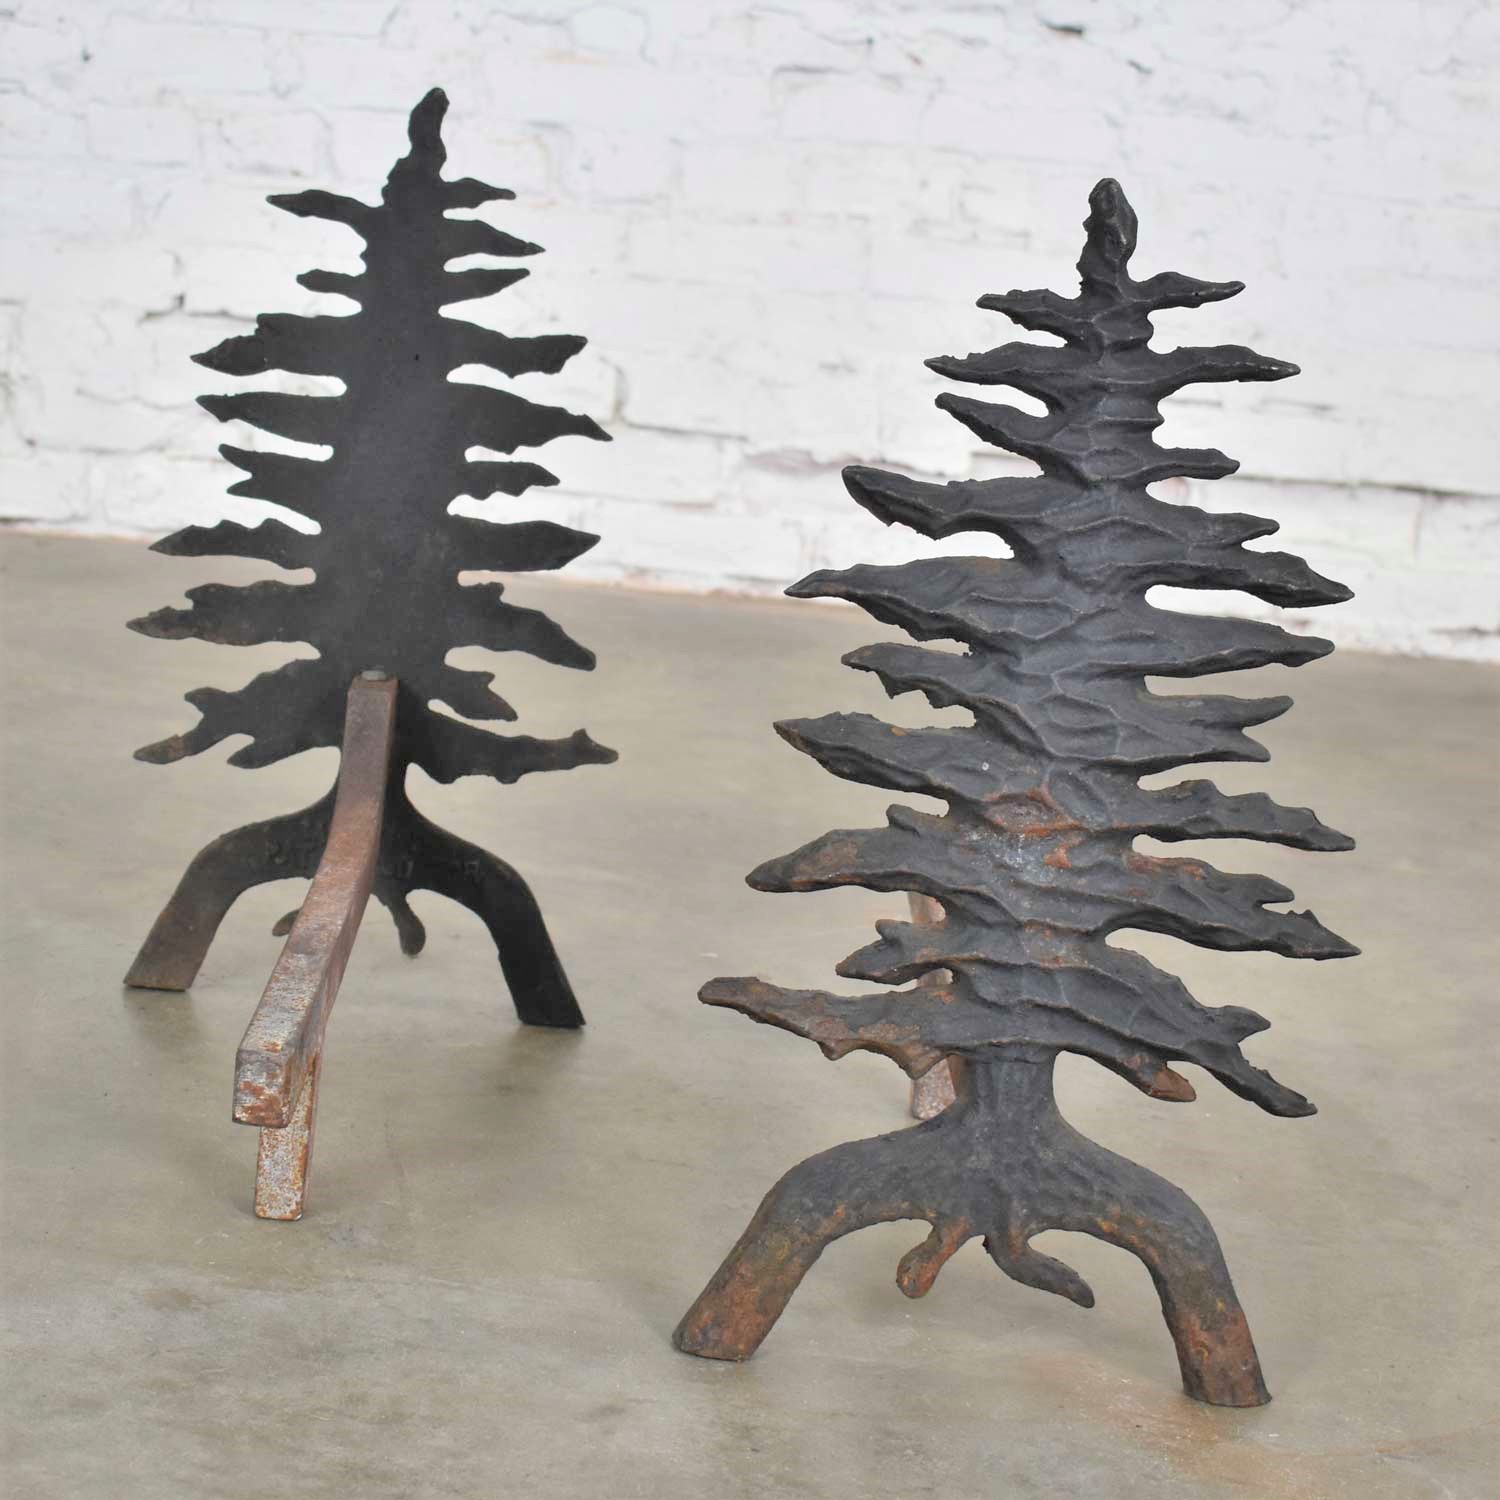 Antique Arts and Craft Pair of Pine Tree Cast Iron Andirons by Martin Industries